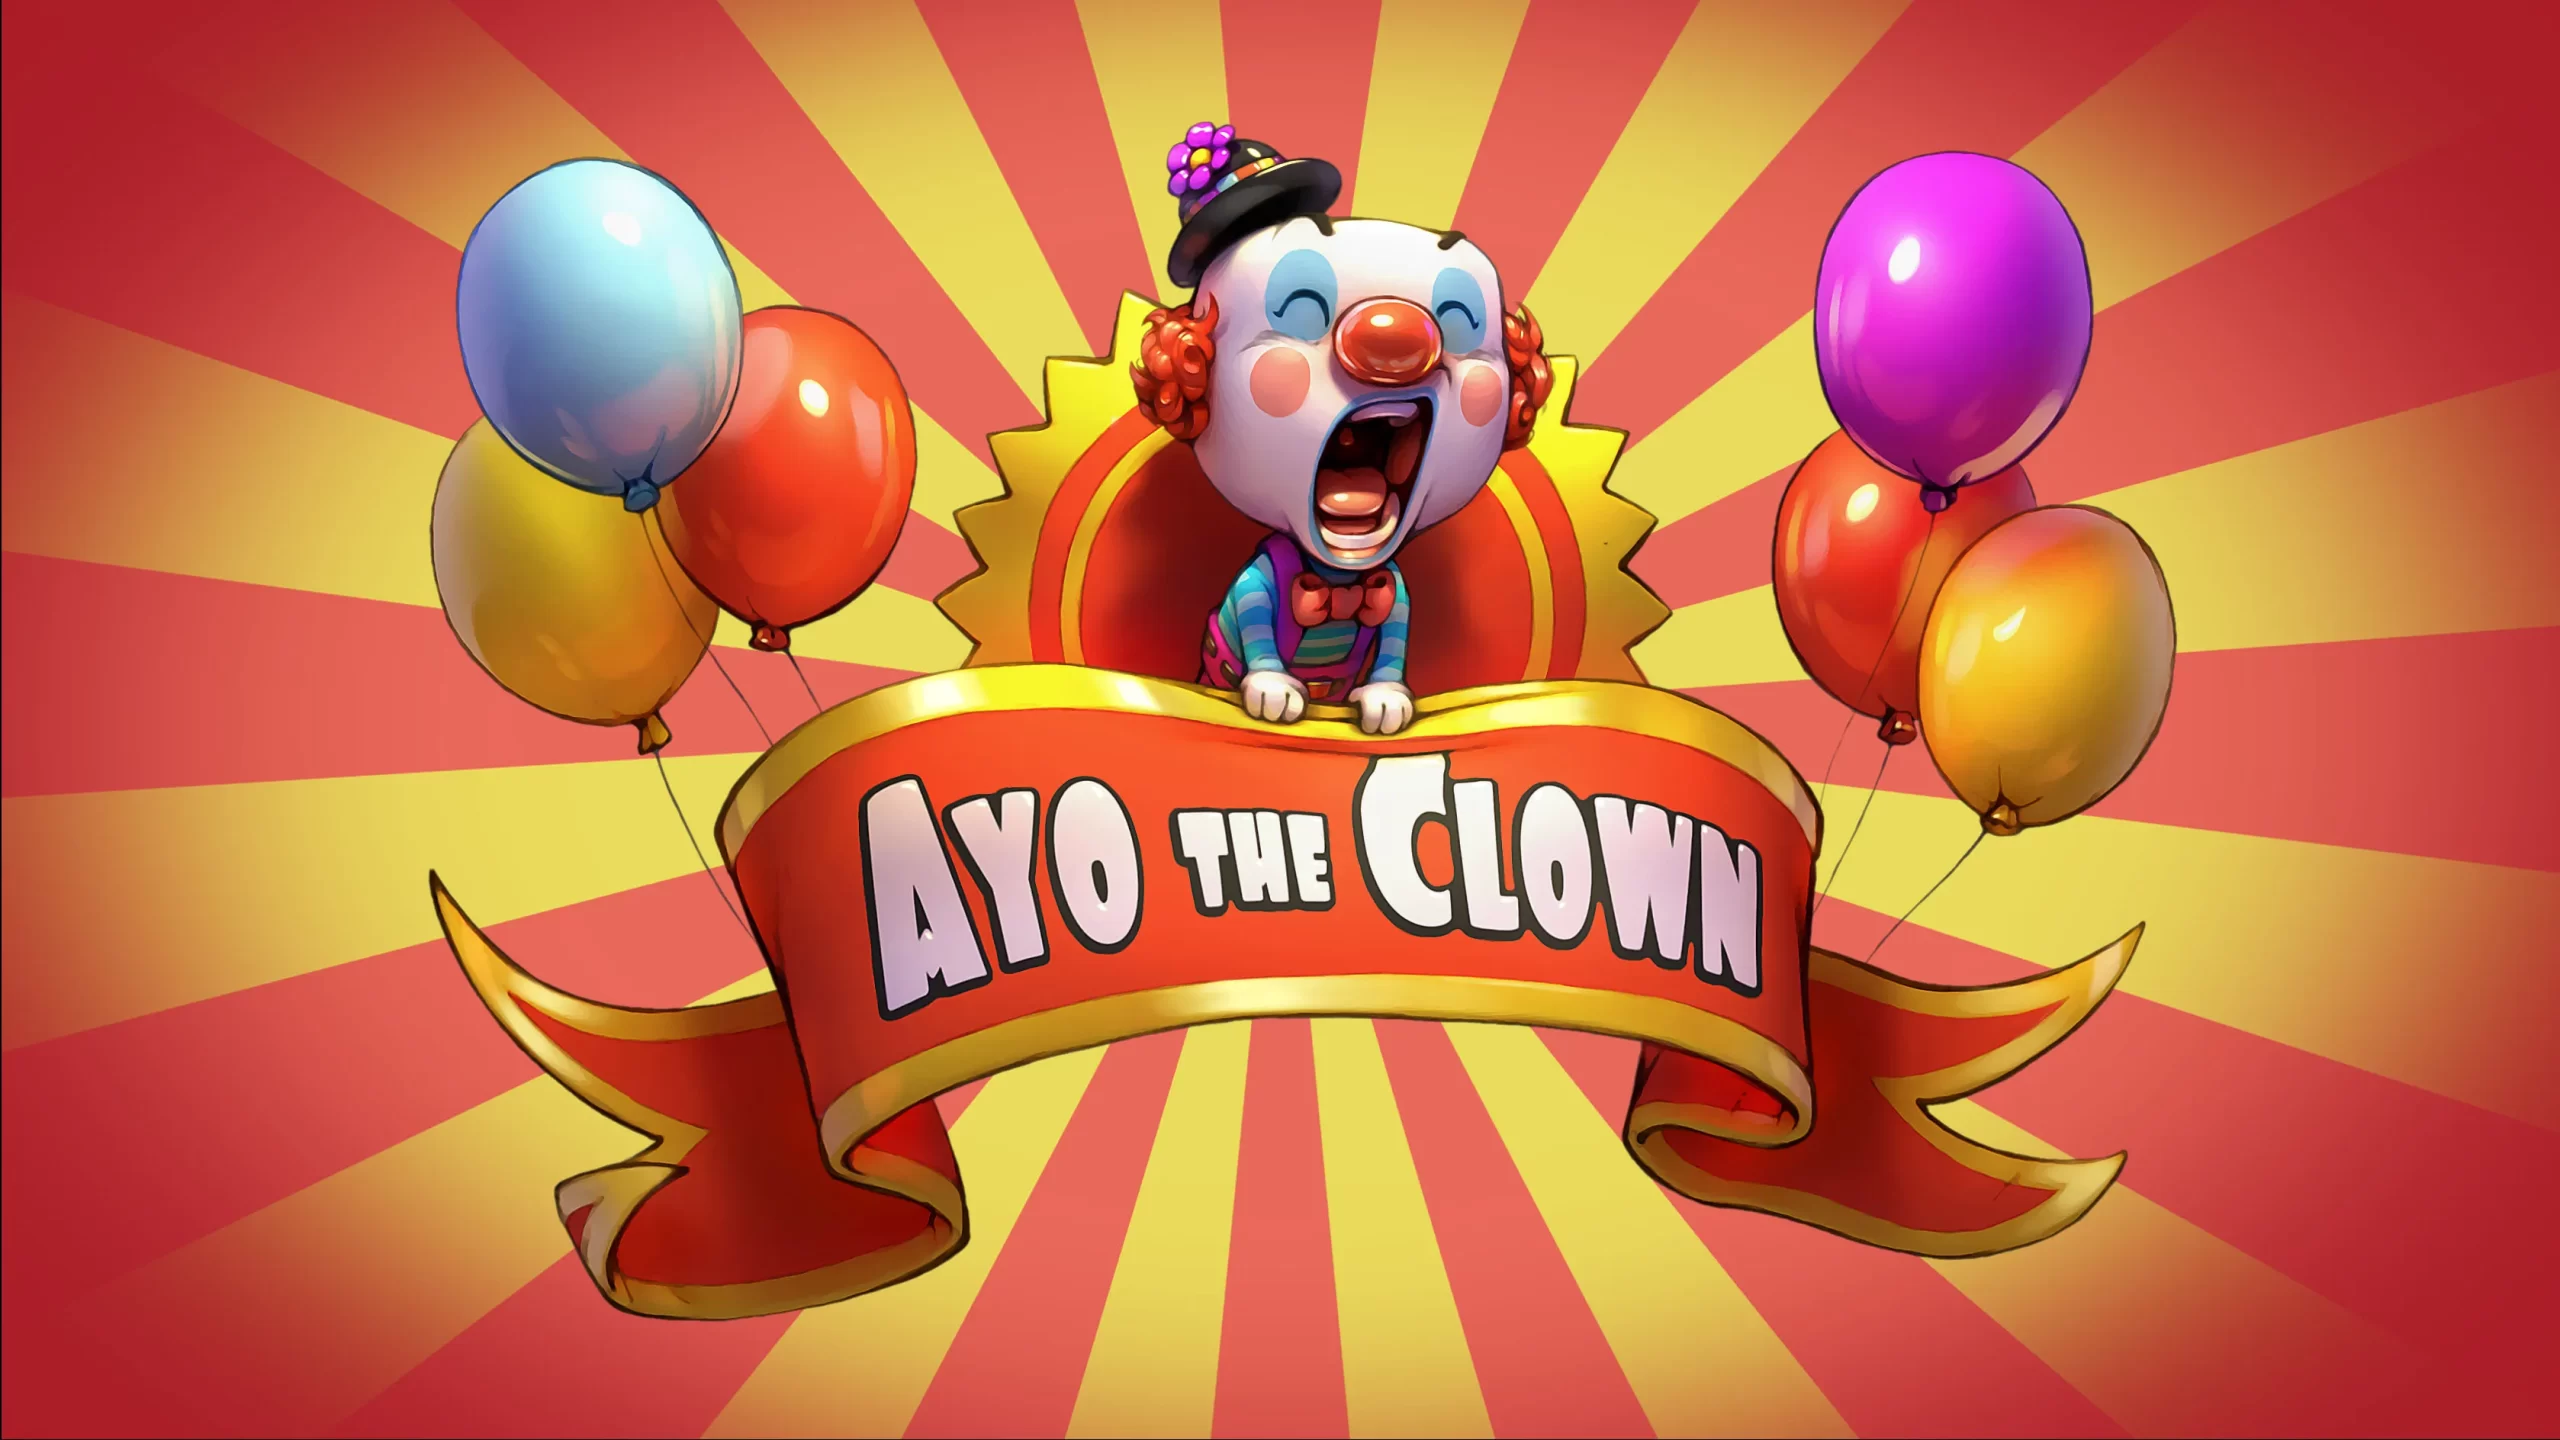 Ayo the Clown Review